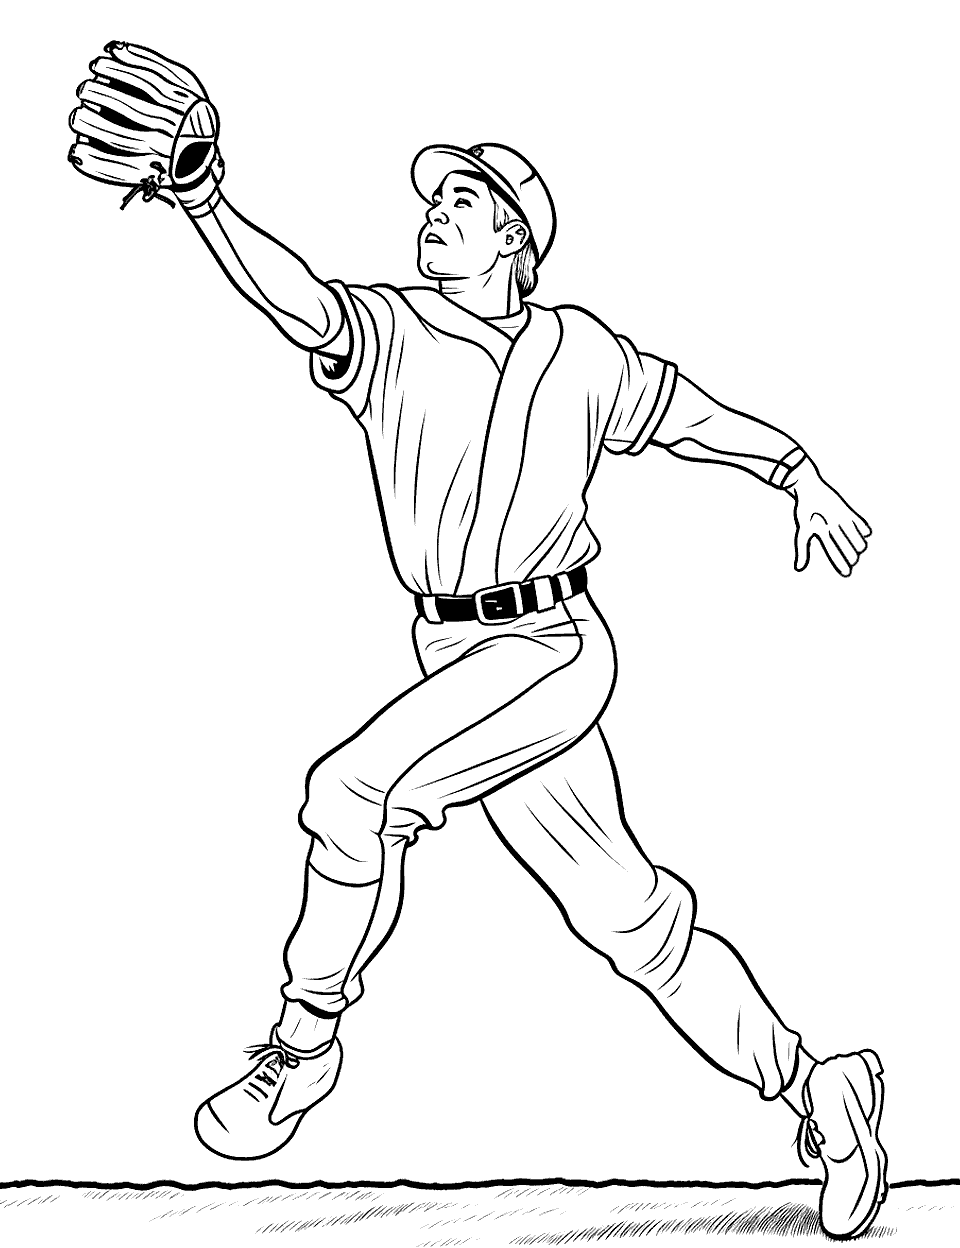 Outfield Catch Baseball Coloring Page - An outfielder leaping to catch a high-flying ball, with concentration and athleticism on display.